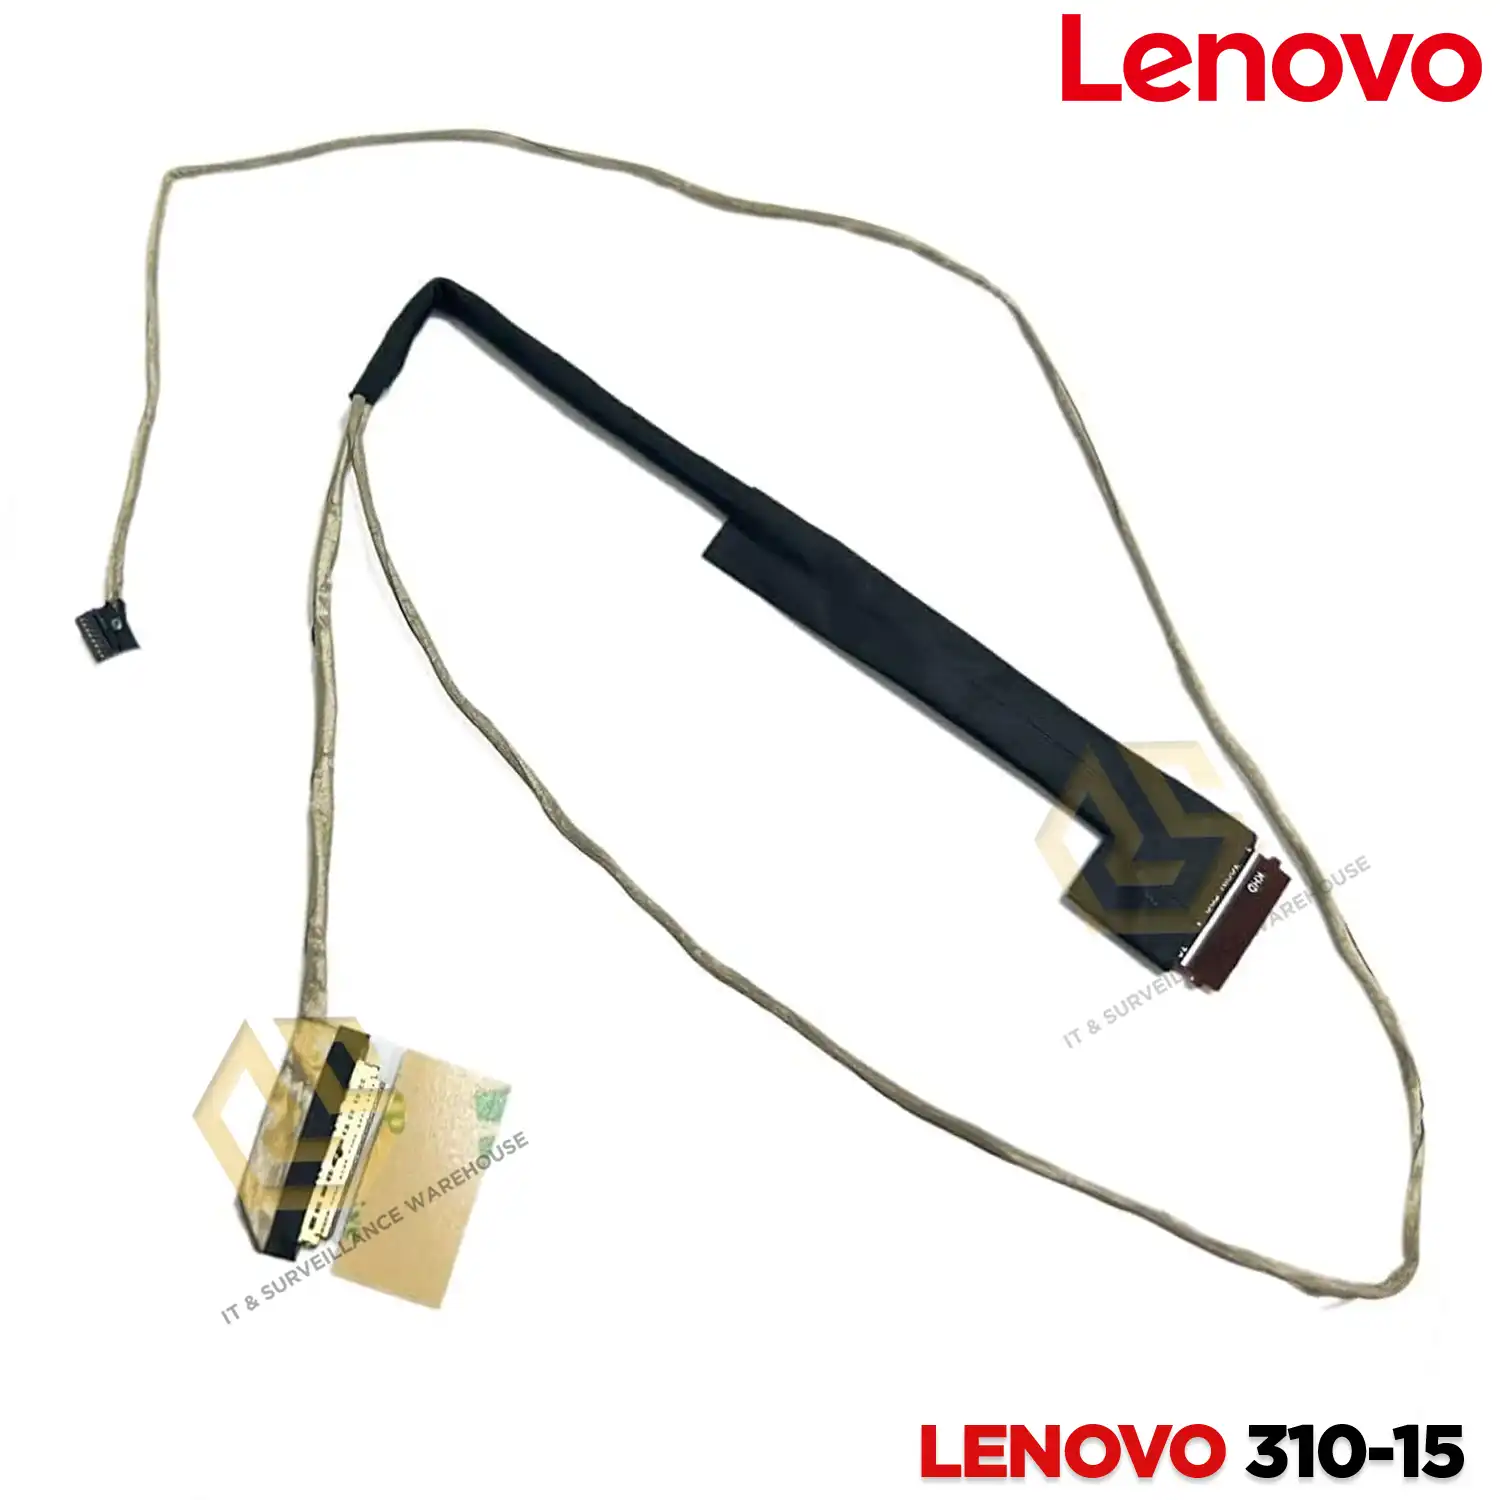 LAPTOP DISPLAY CABLE FOR LENOVO IDEAPAD 310-15 | 310-15ISK | 310-15ABR | 310-15IKB